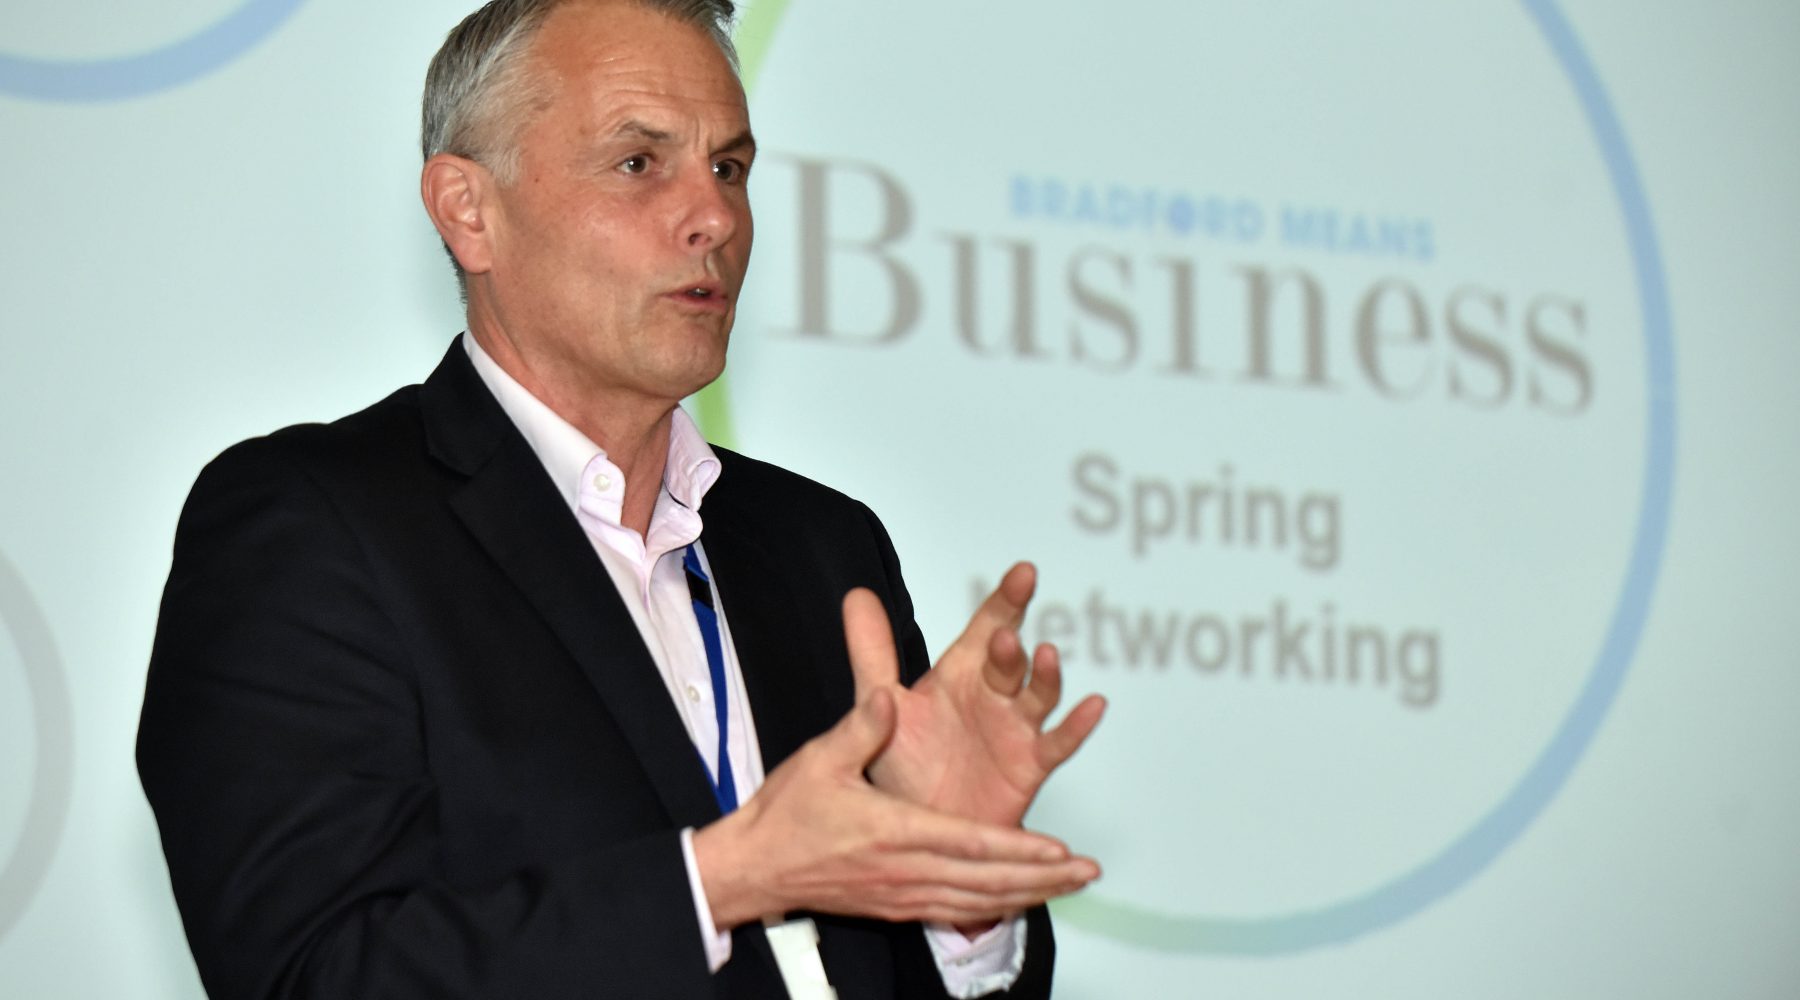 Bradford Means Business – Spring Networking Event